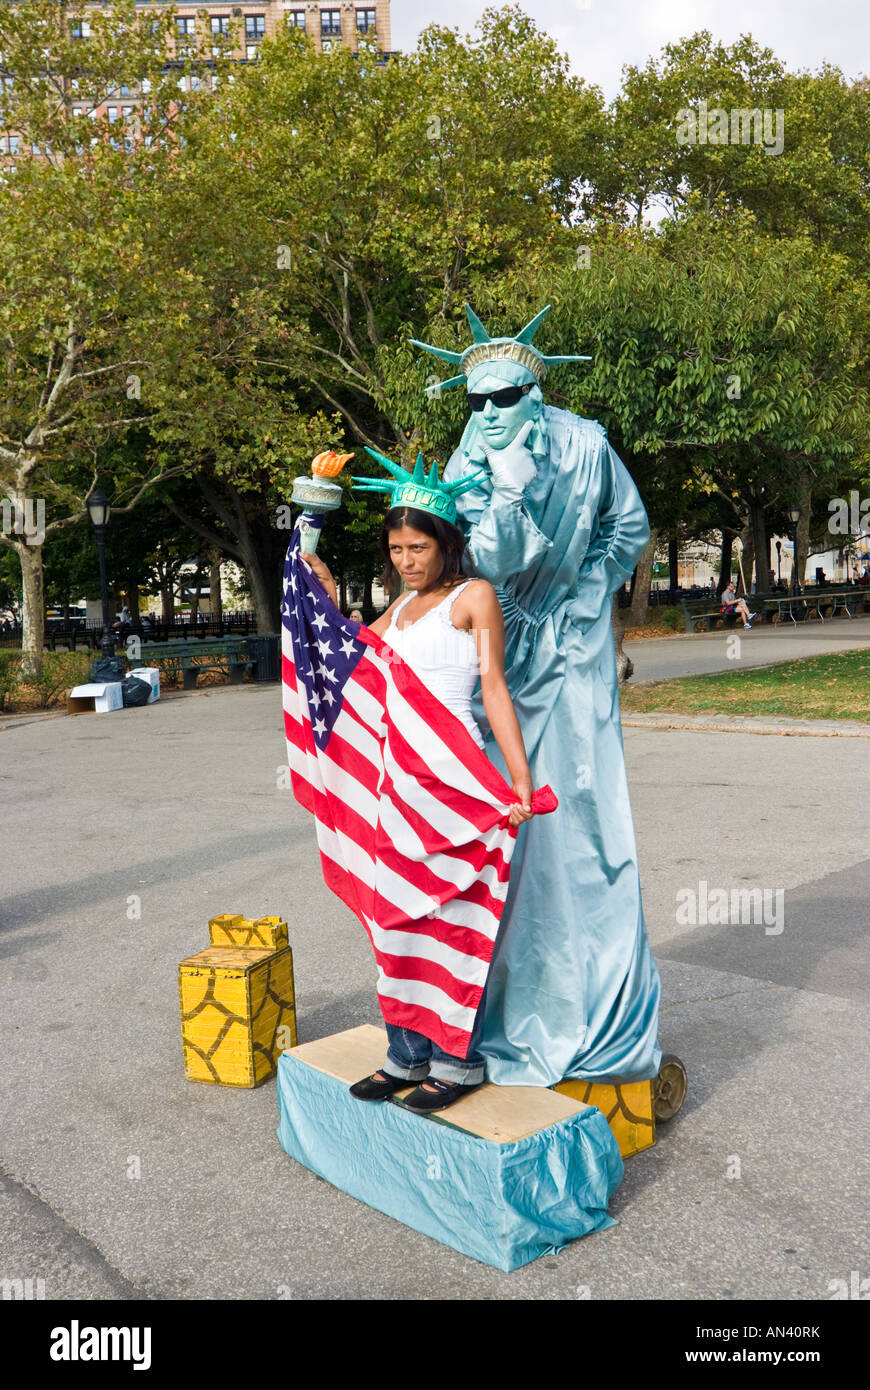 15 Best Places To Take a Photo With the Statue of Liberty